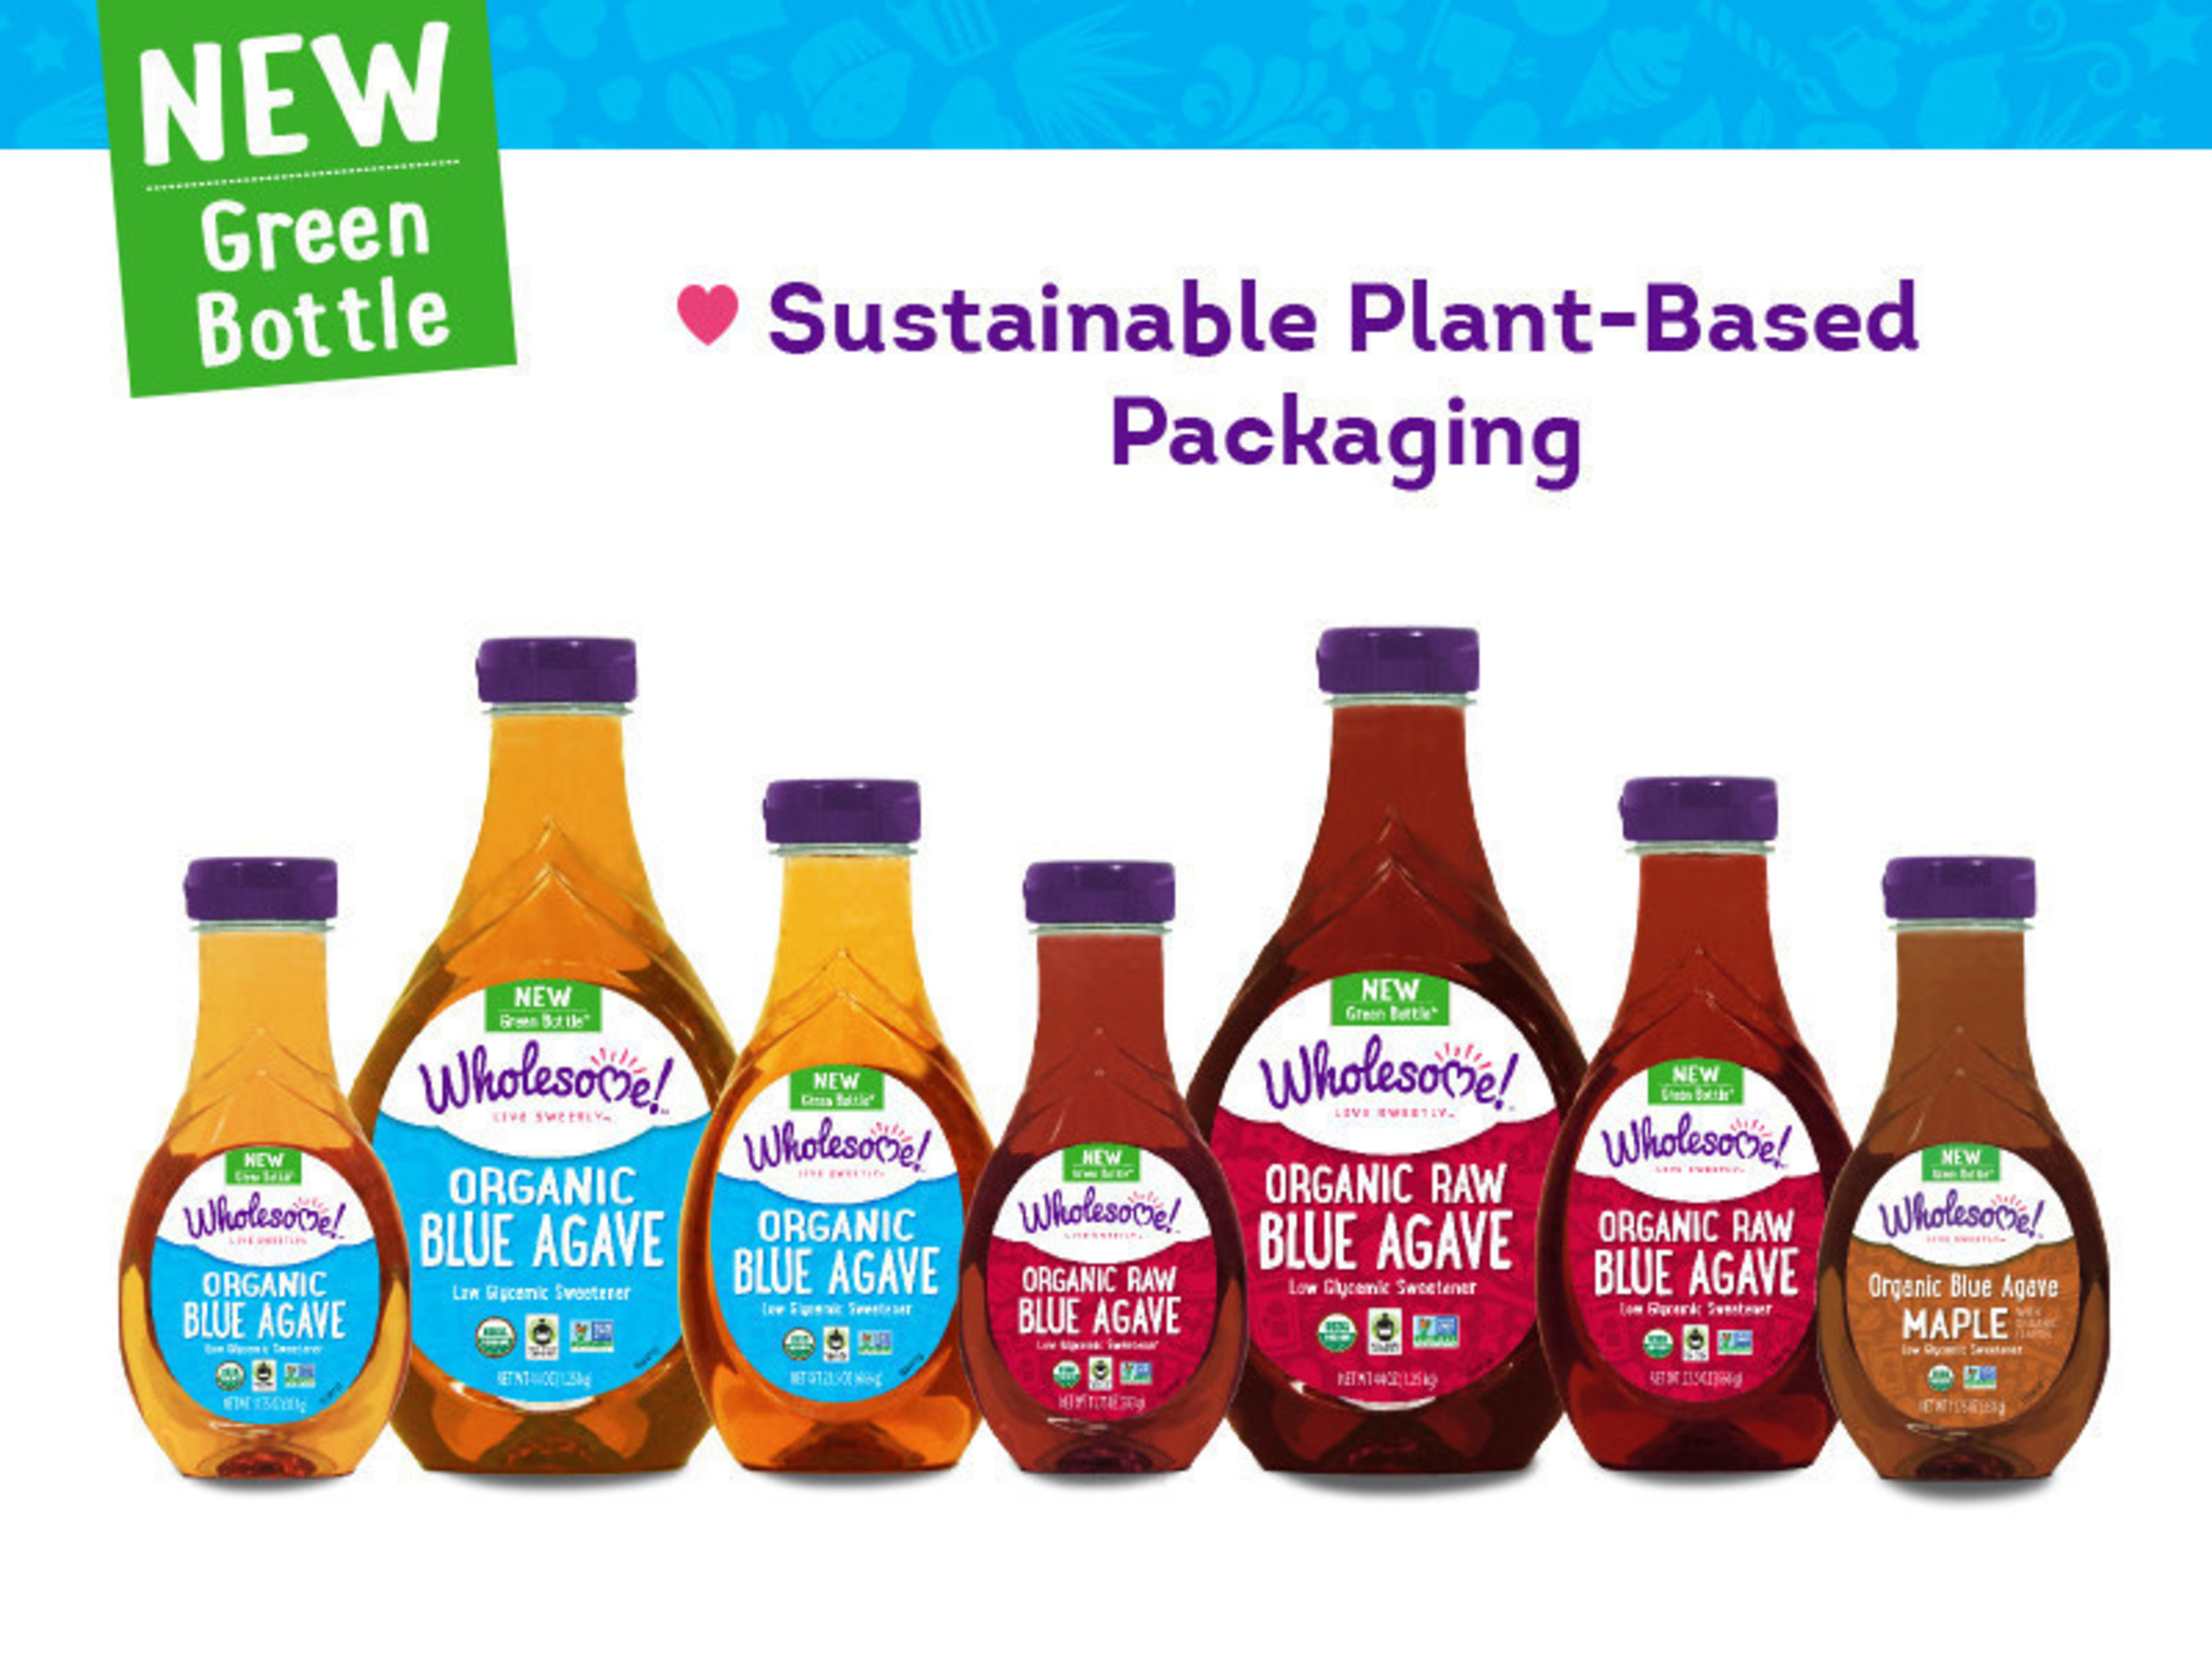 Wholesome! is transitioning its seven-bottle Organic Blue Agave line into a custom recyclable Green Bottle. The eco-friendly bottles are made from up to 30% plant-based PET and are recyclable and BPA free. The Green Bottles will be available in 11.75, 23.5 and 44 ounces and will flow through store shelves in late summer 2016.